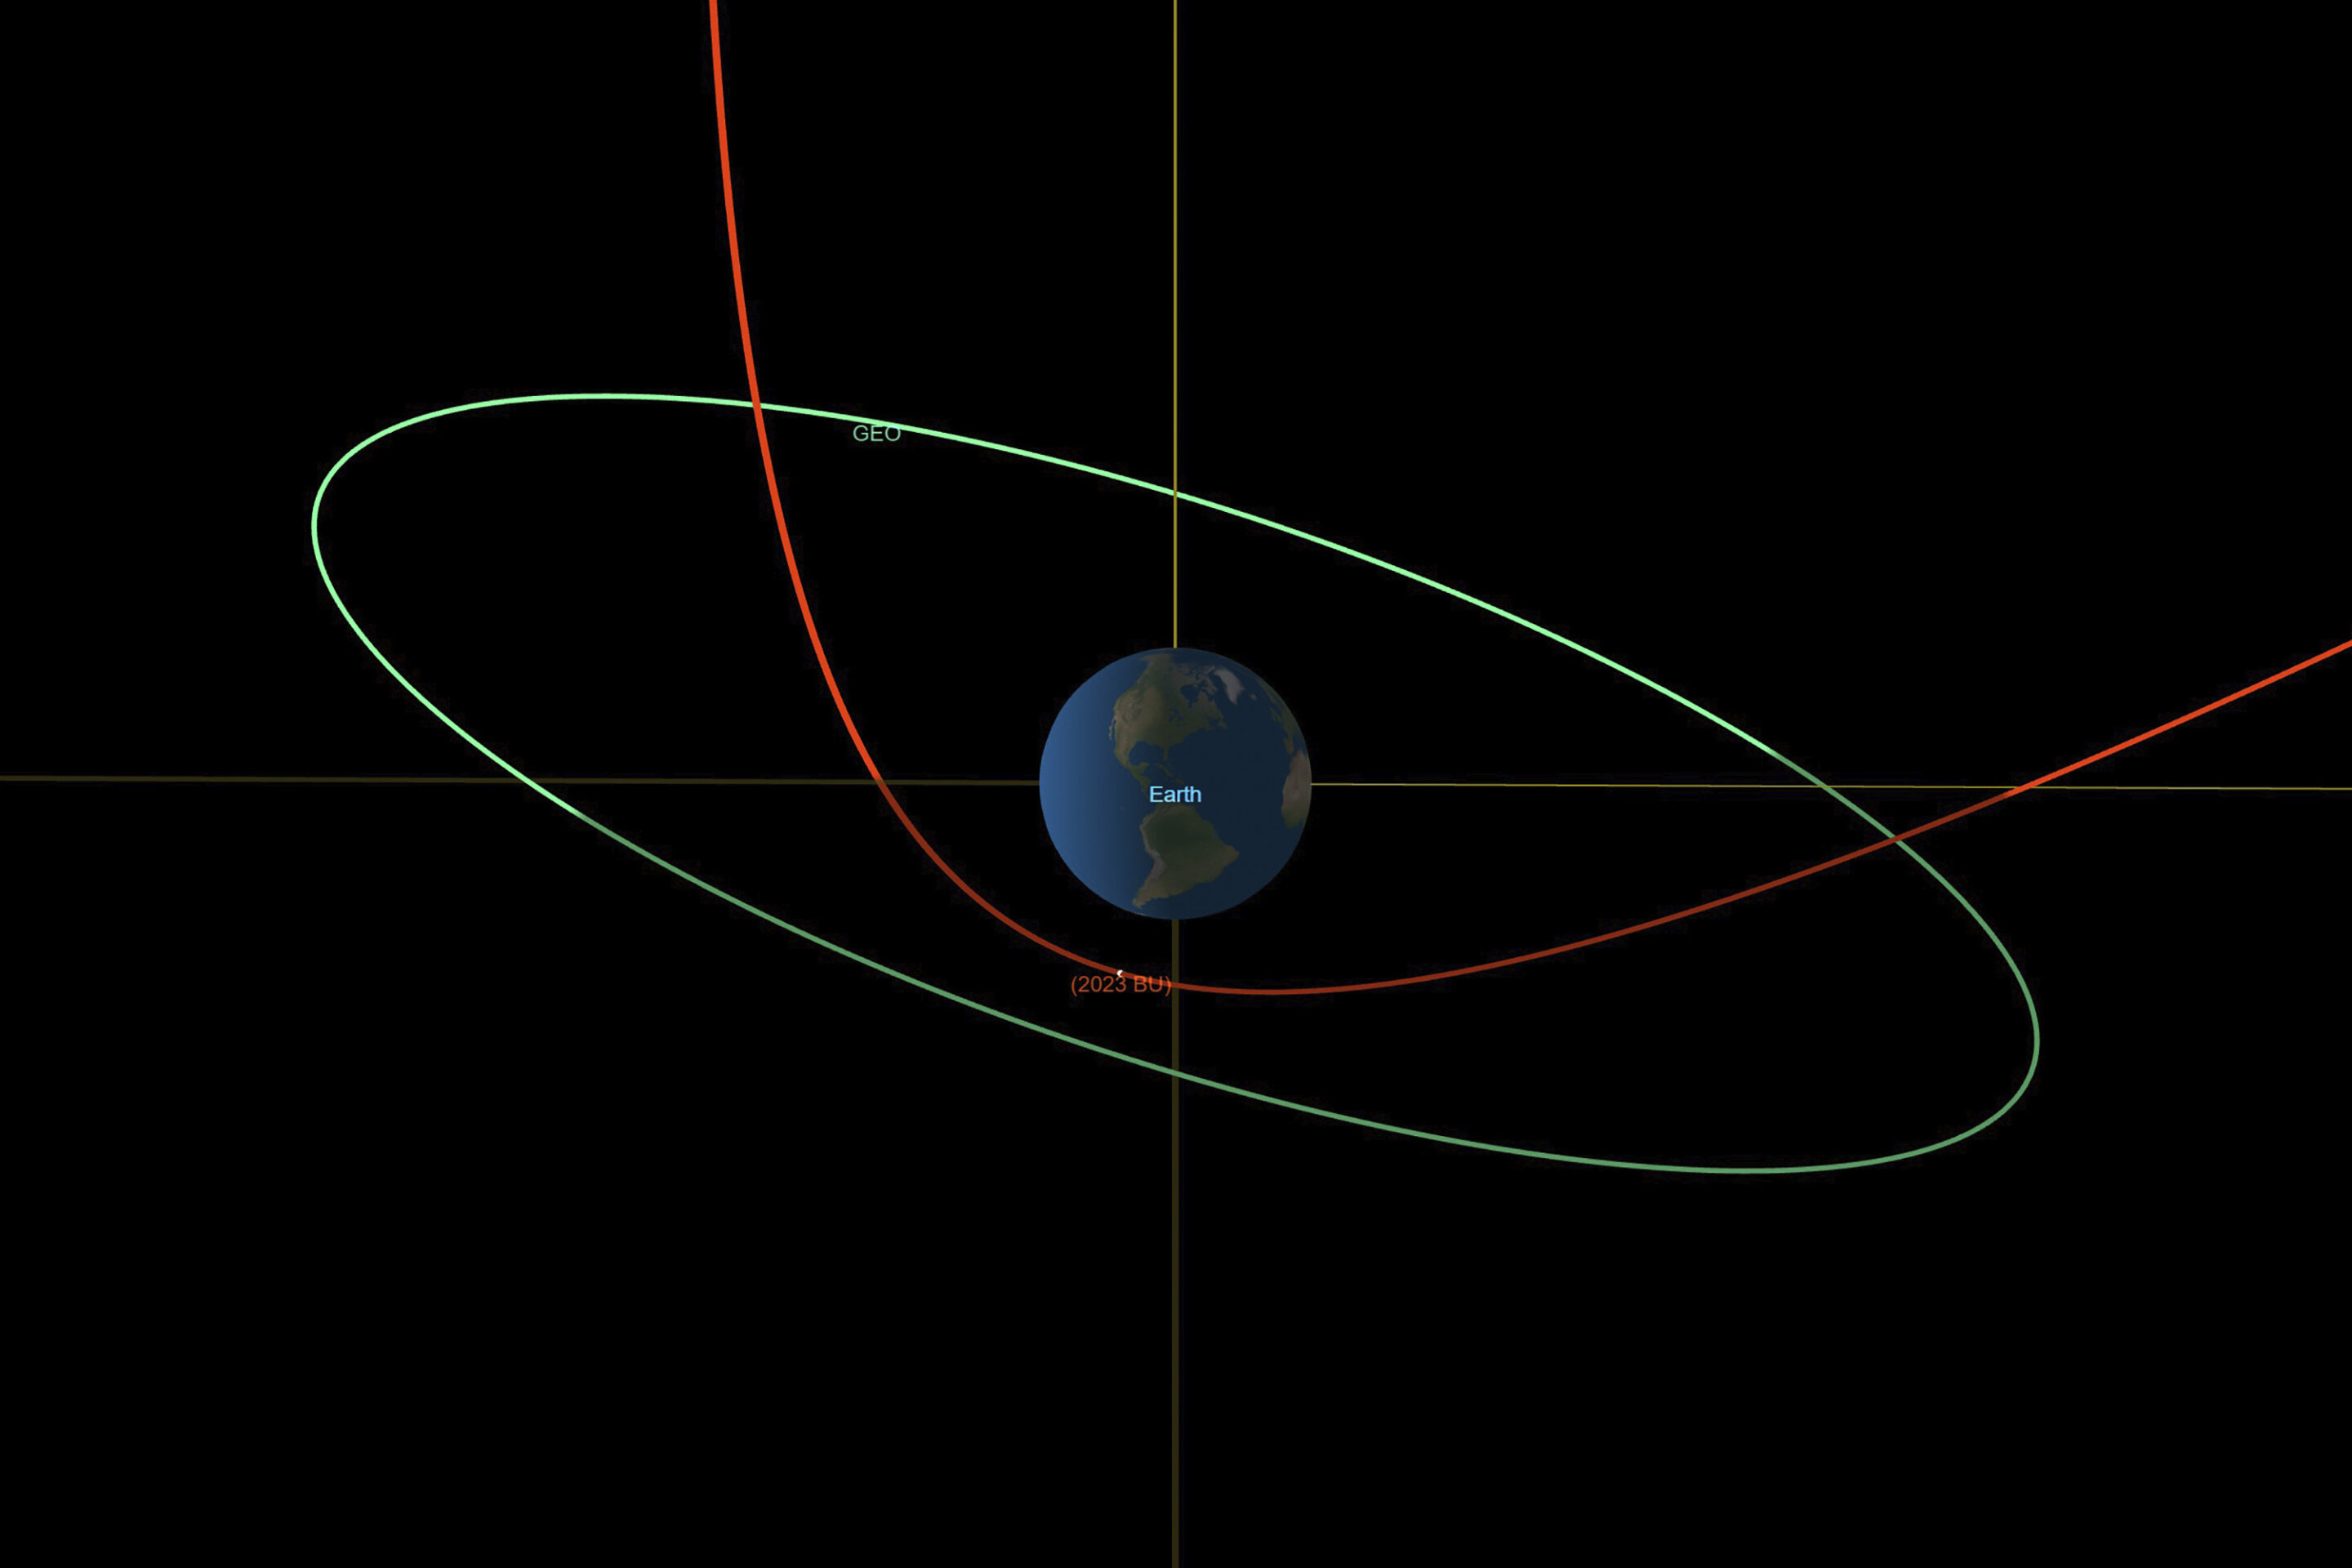 #Asteroid coming exceedingly close to Earth, but will miss